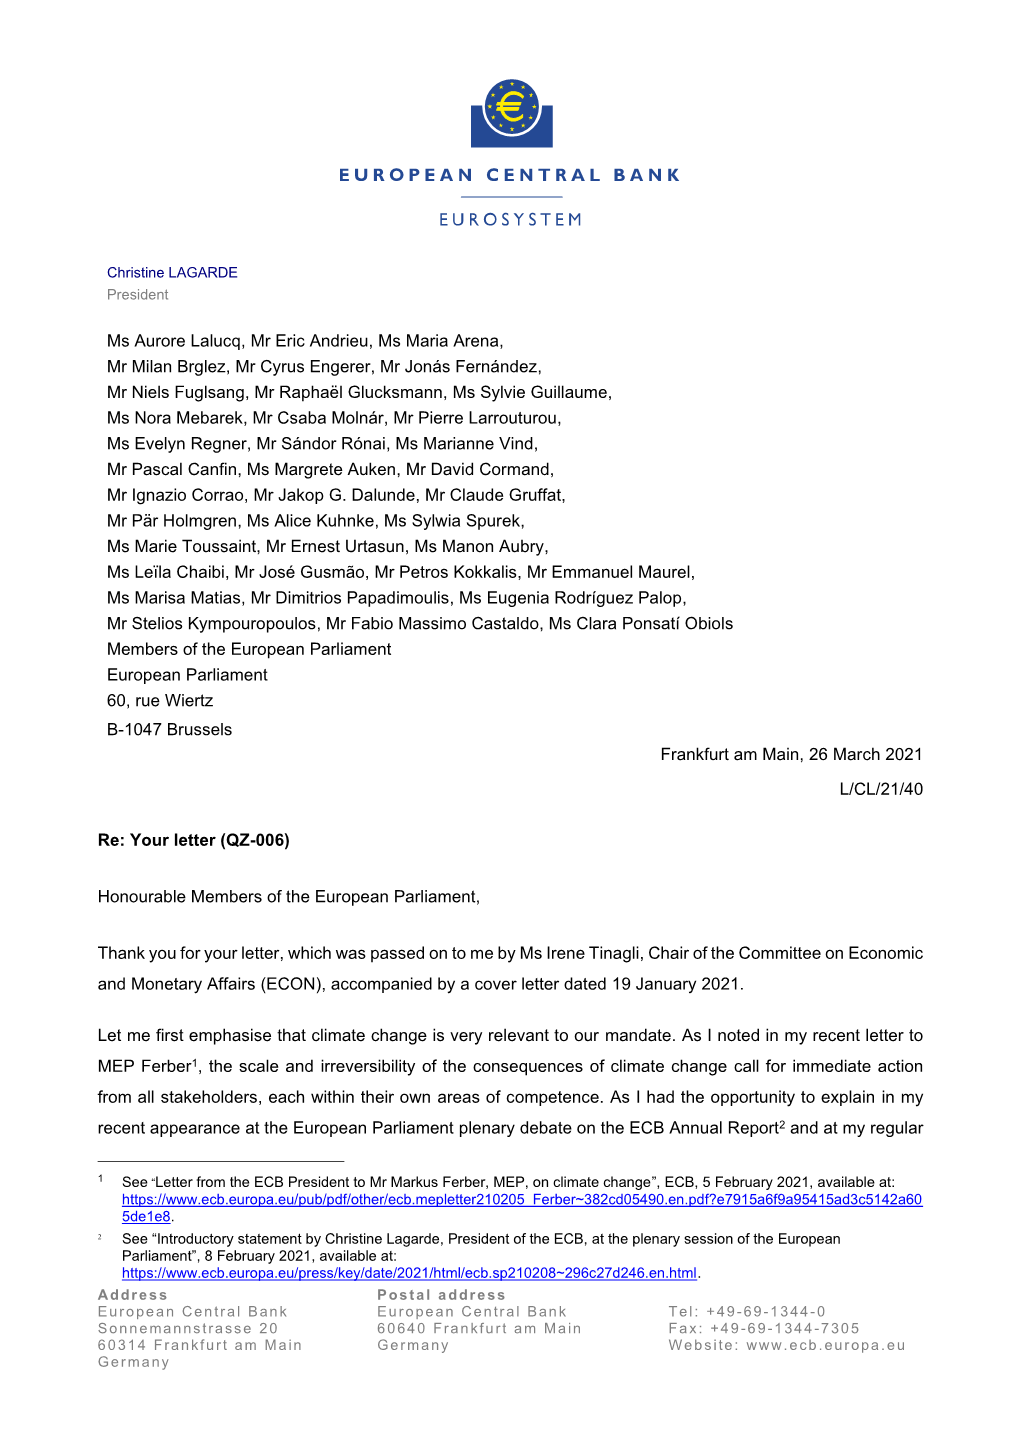 Letter from the ECB President to Several Meps, on Climate Change